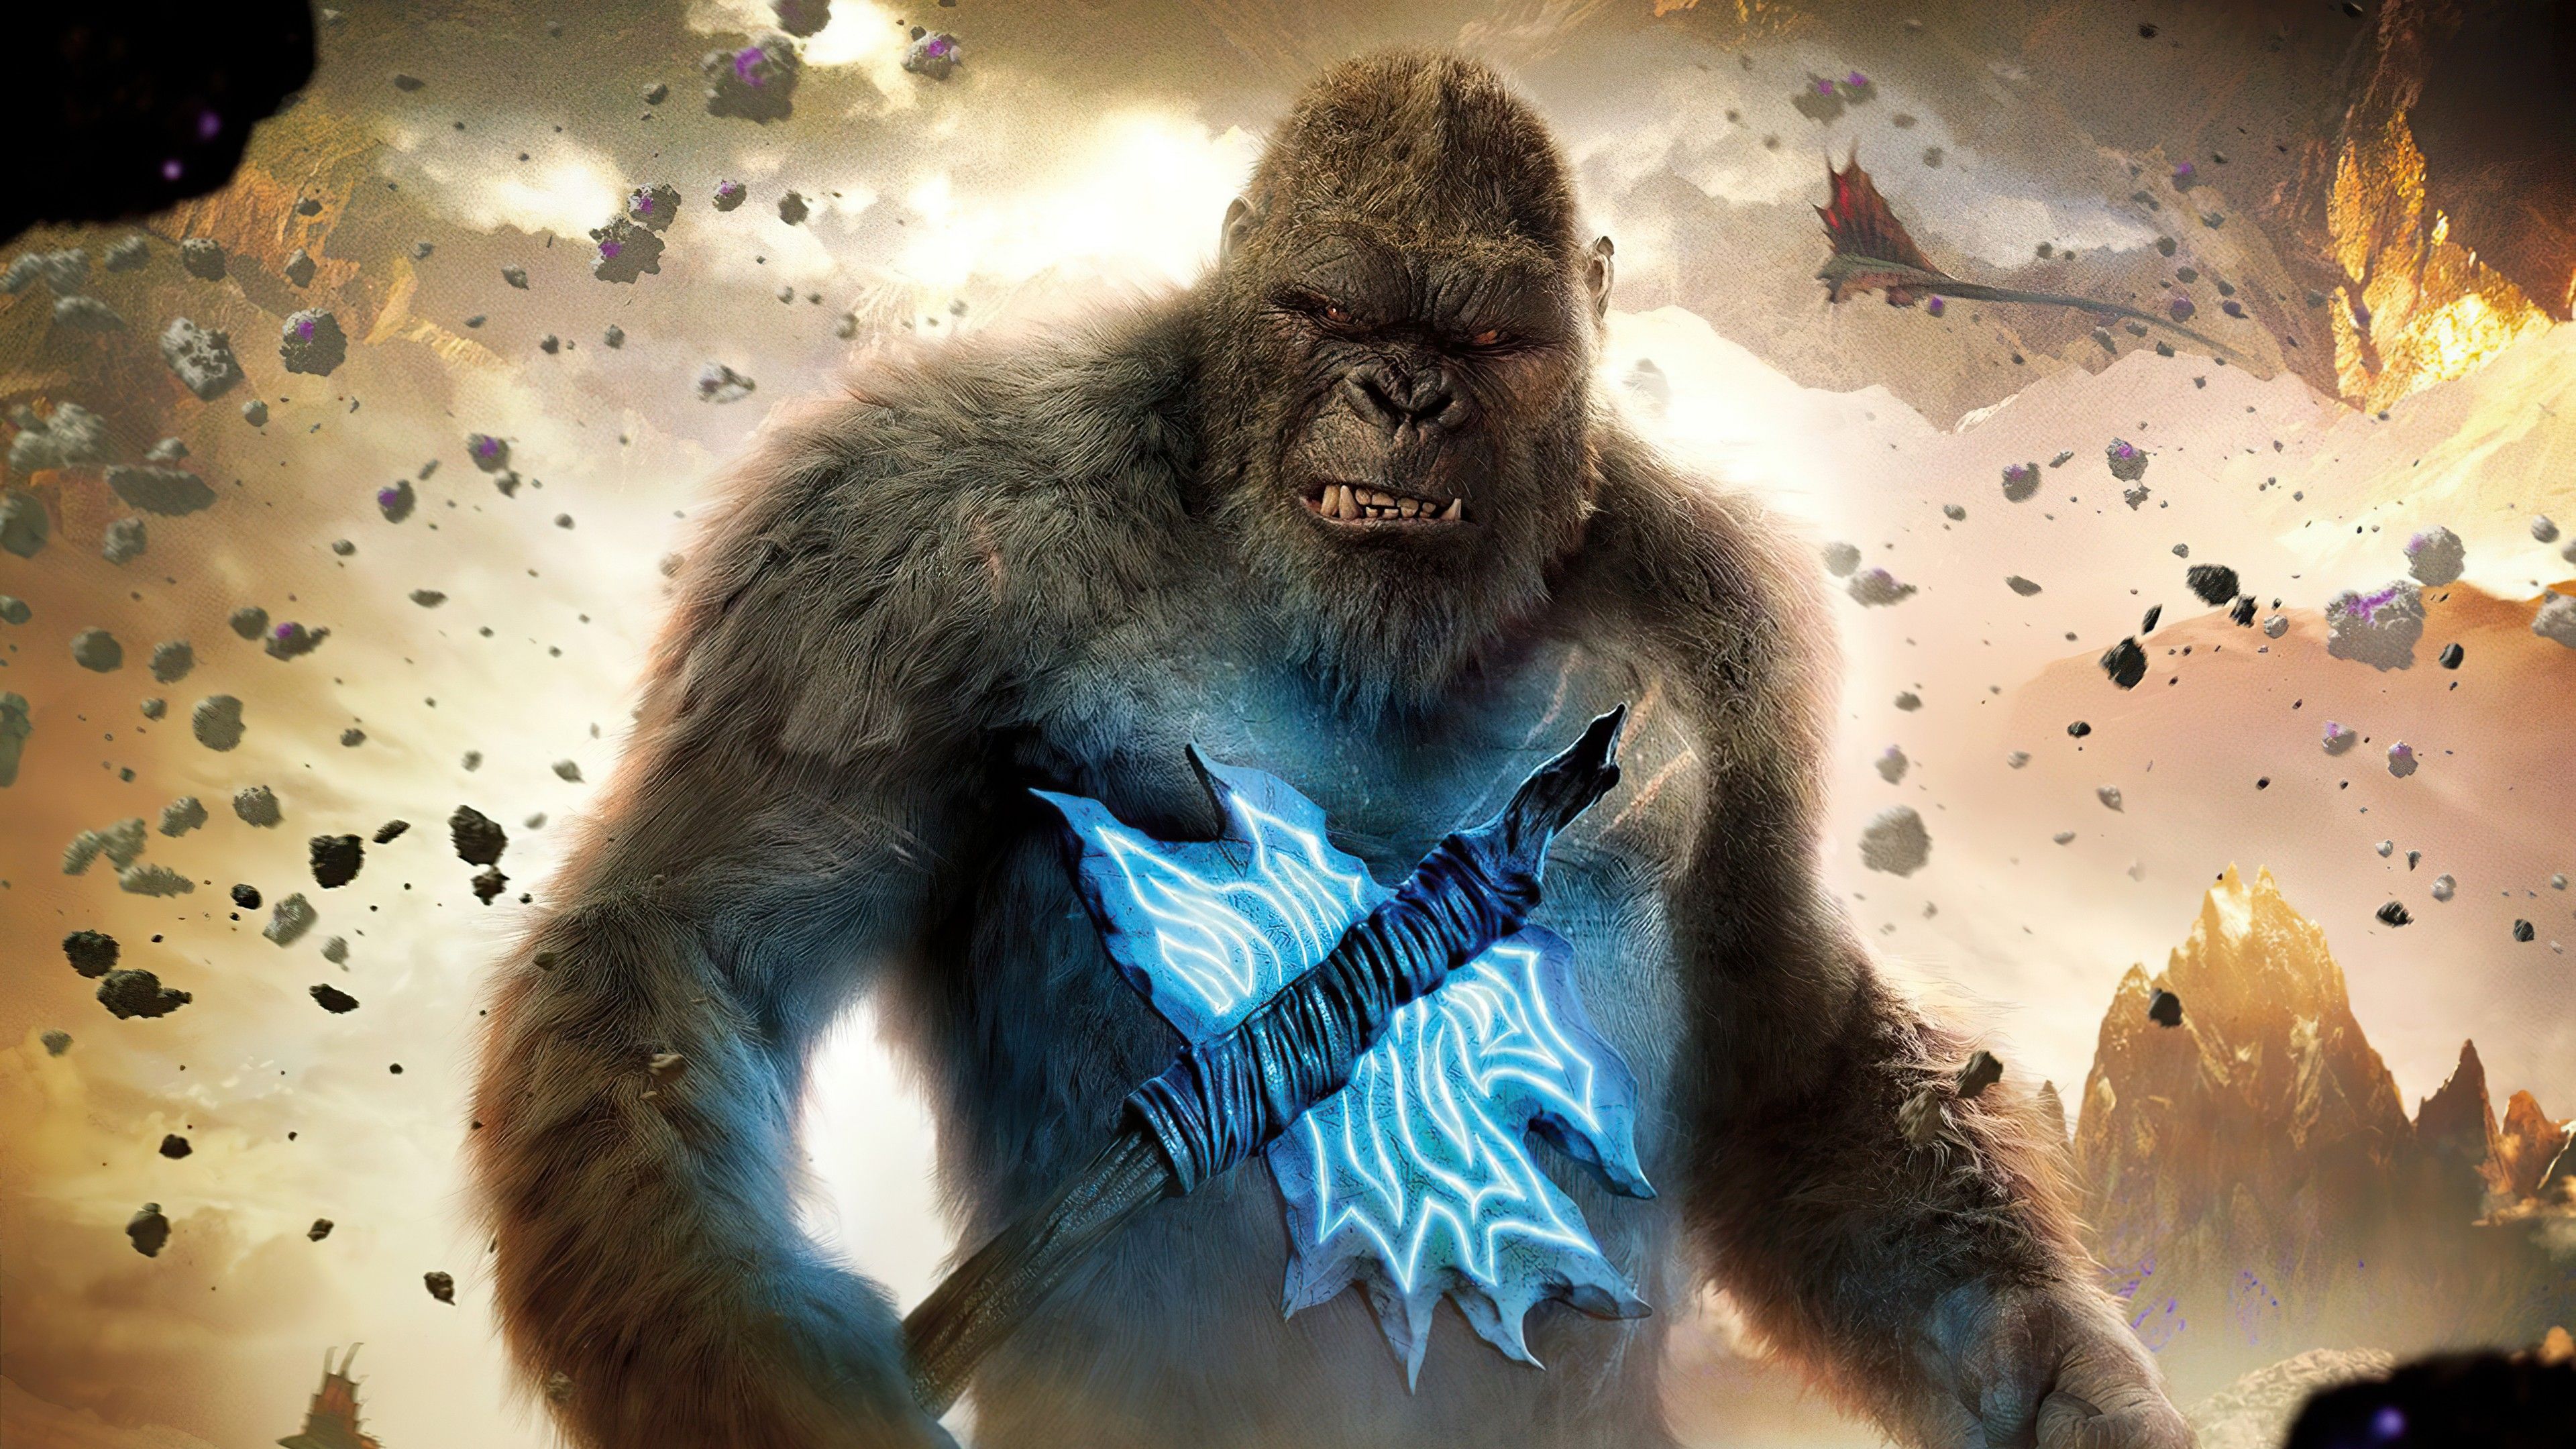 Godzilla Vs Kong Wallpaper / HD Wallpaper Movie Godzilla Vs Kong King Kong Wallpaper Flare / Legends collide as godzilla and kong, the two most powerful forces of nature, clash